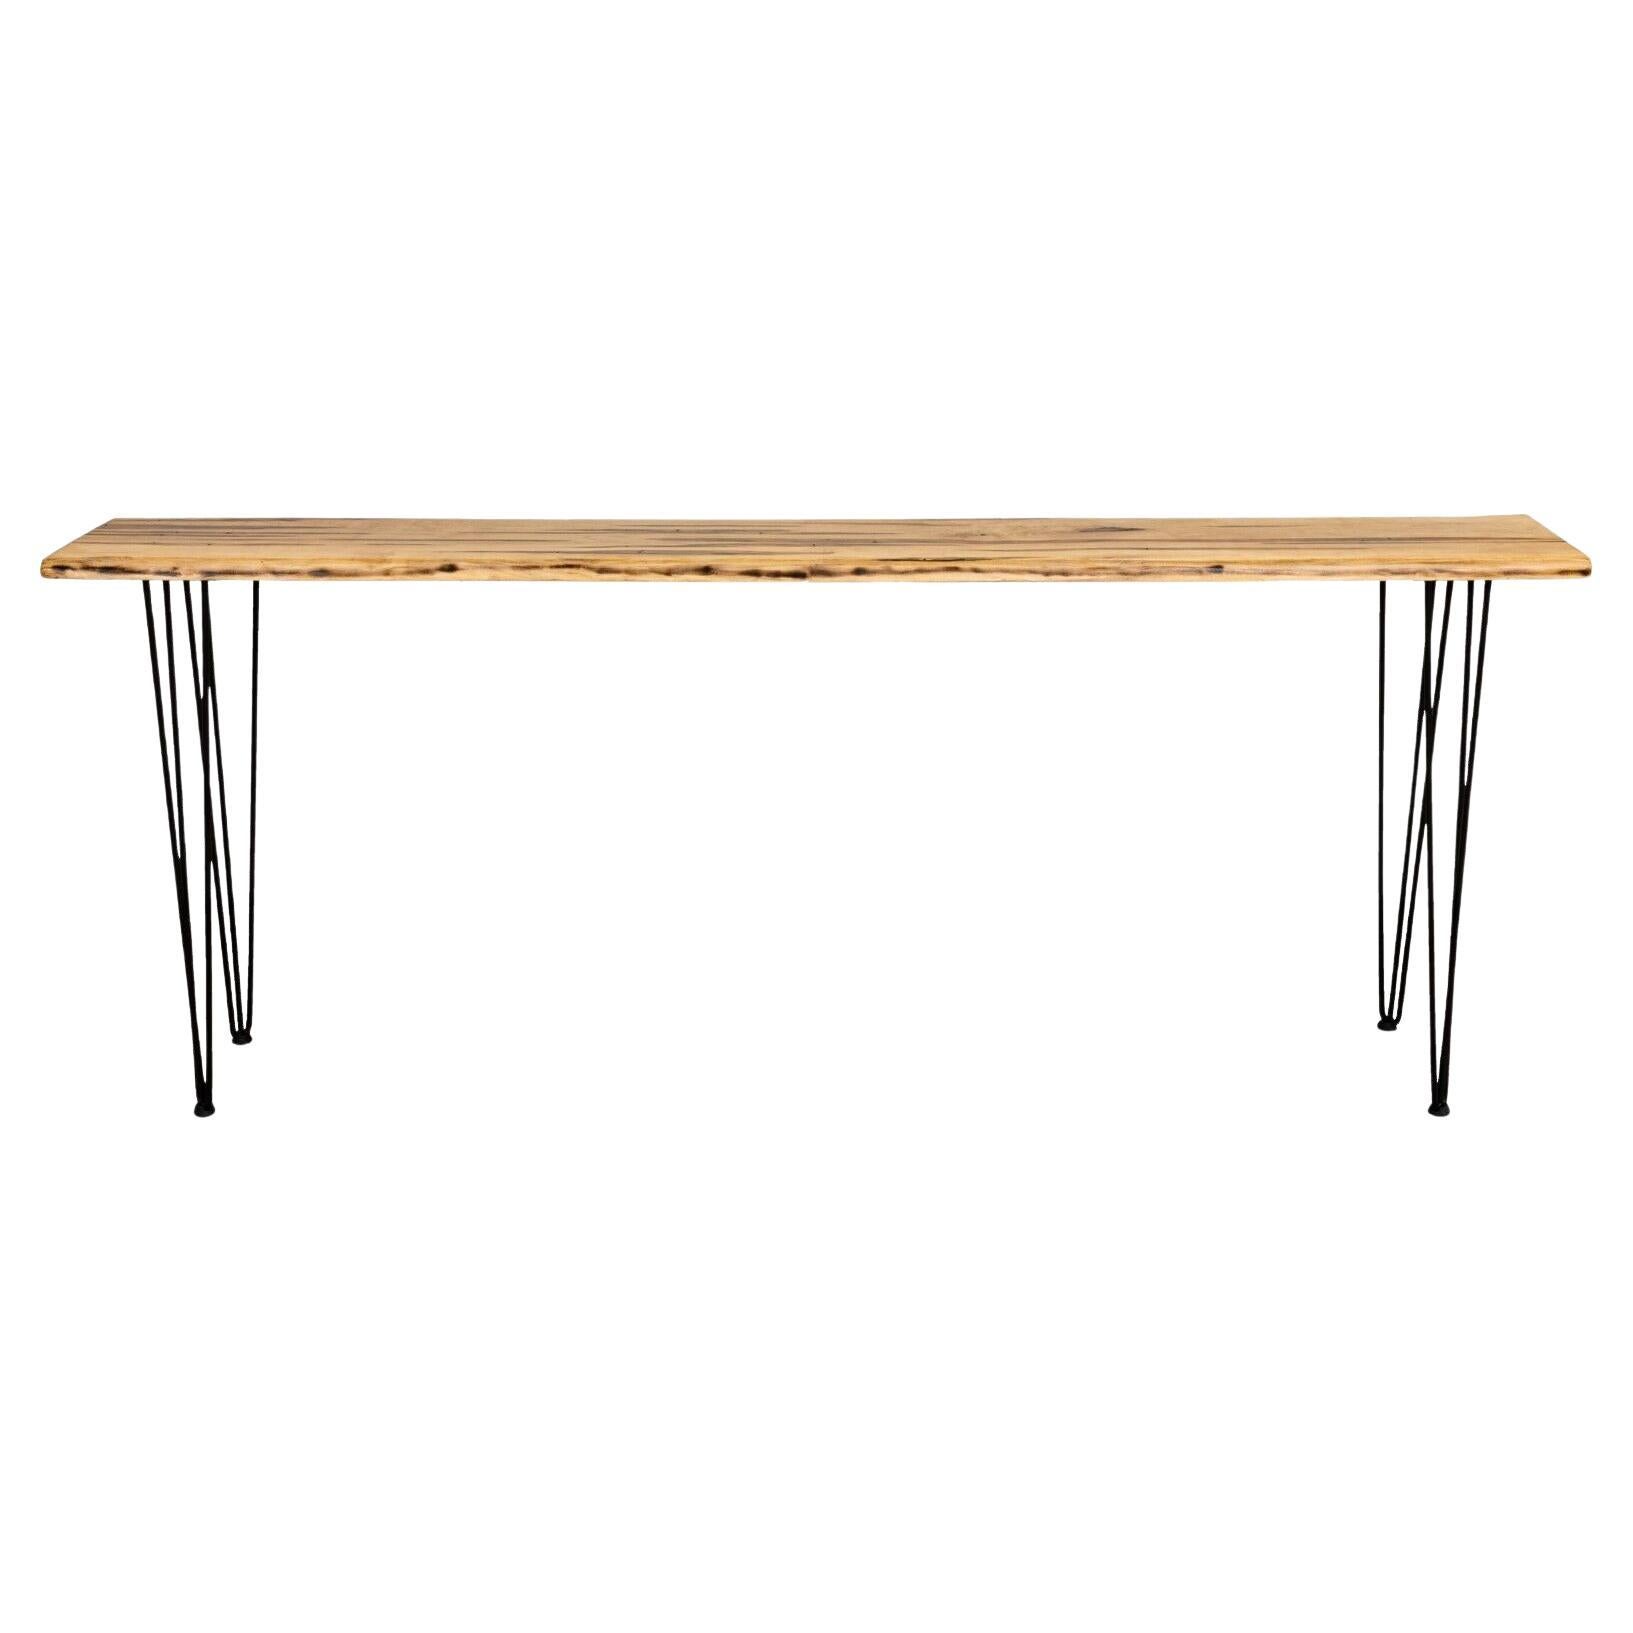 What is an edge table?